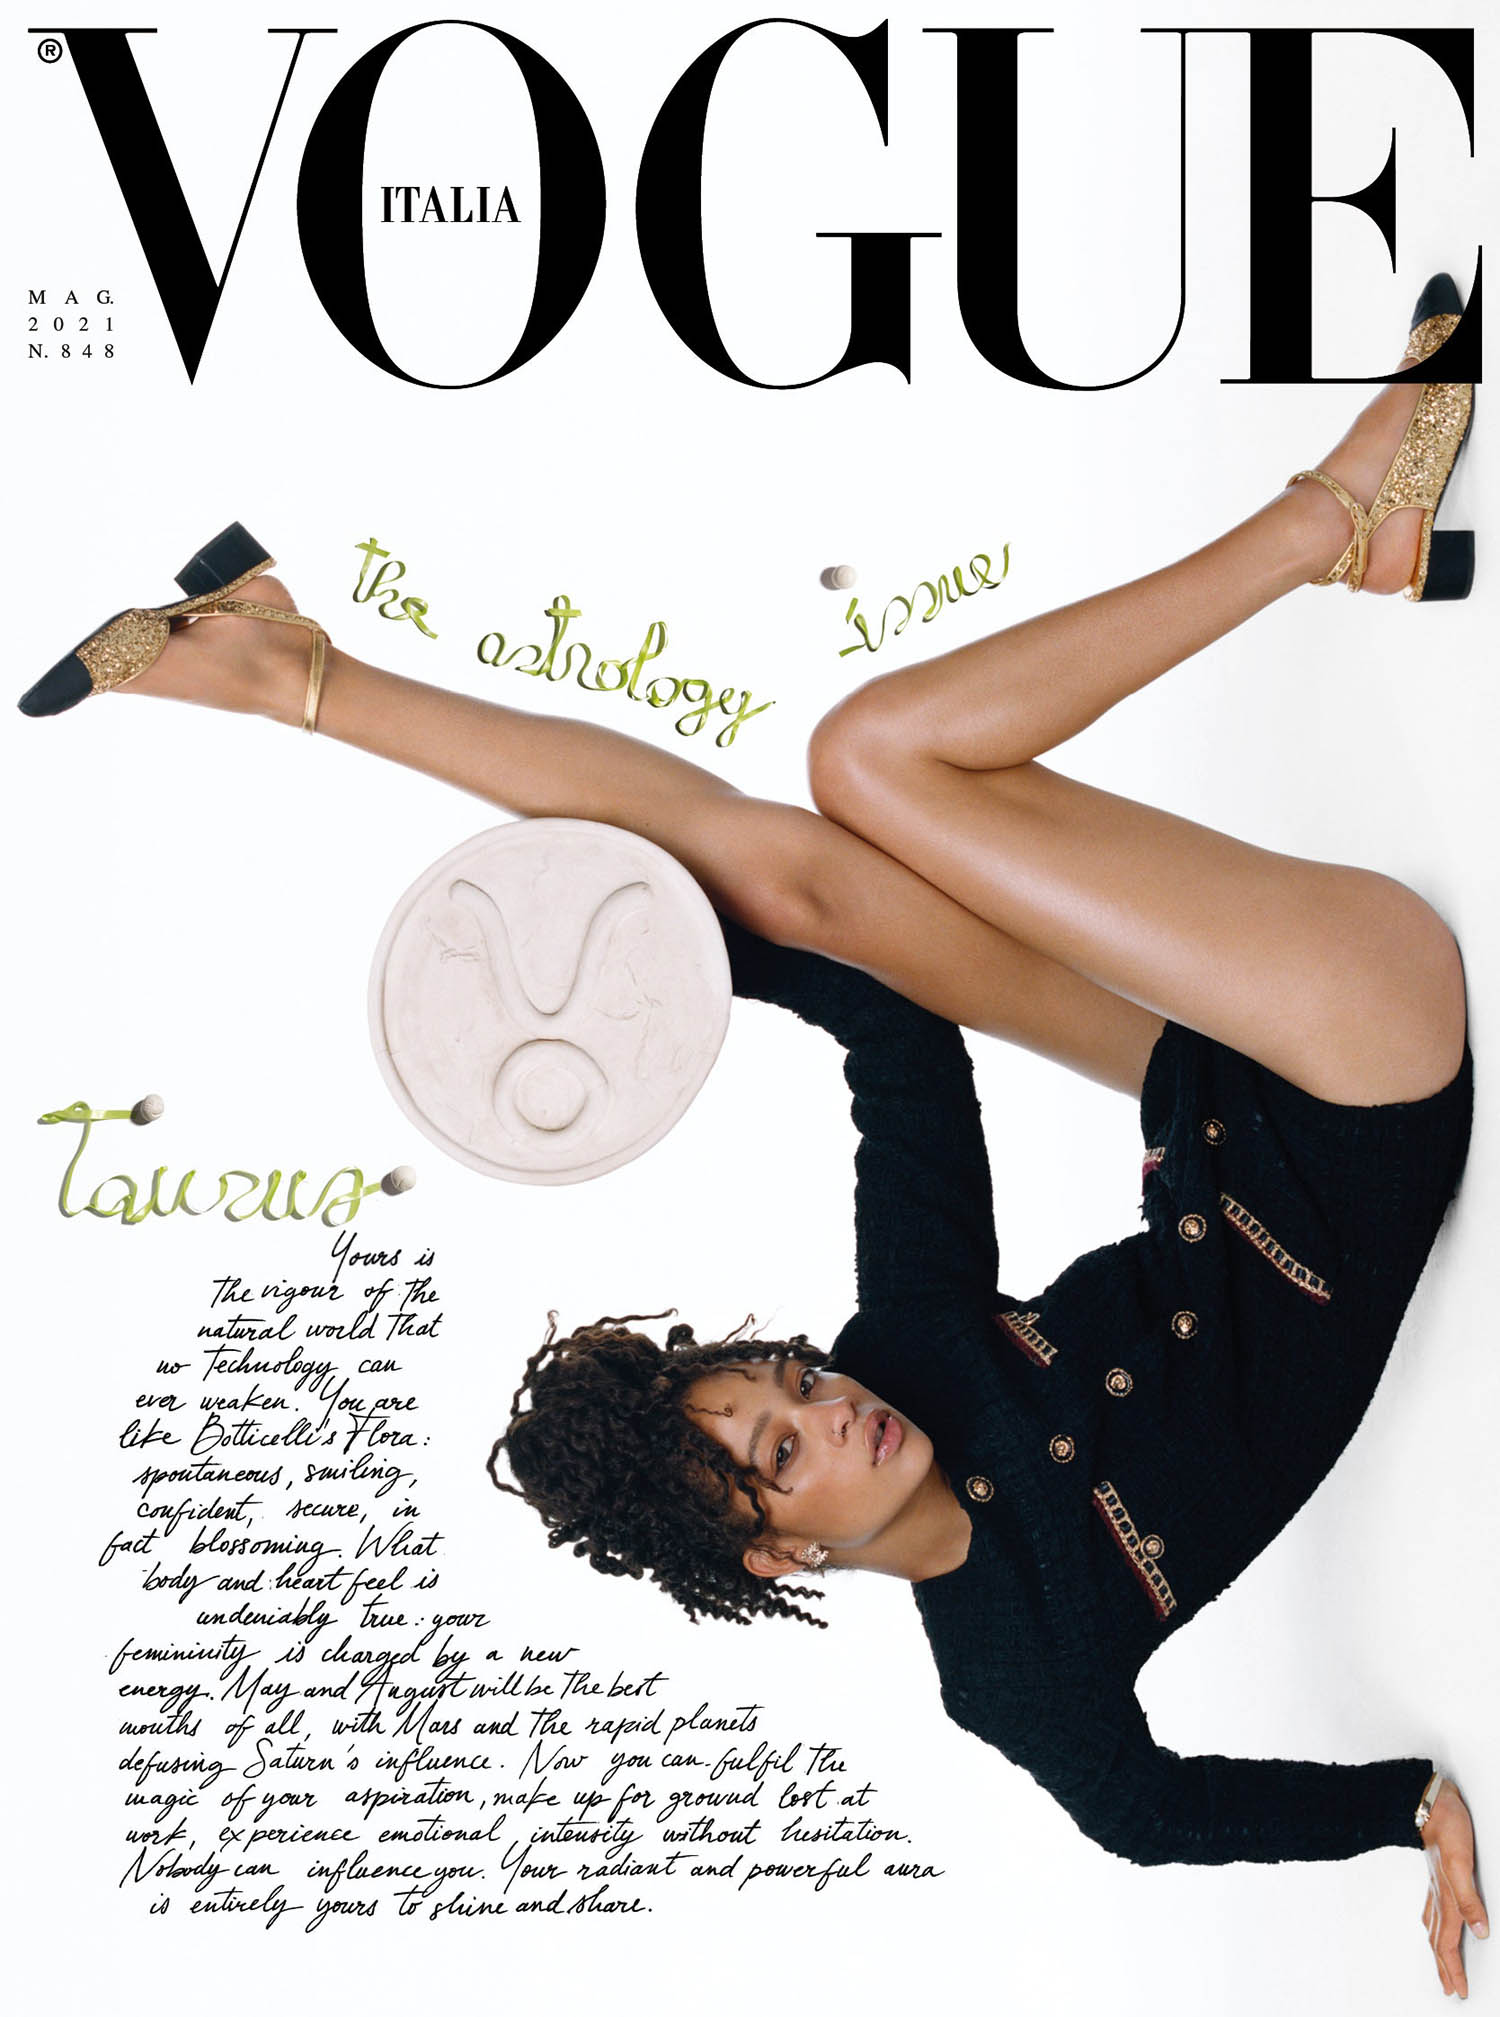 Vogue Italia May 2021 covers by Oliver Hadlee Pearch